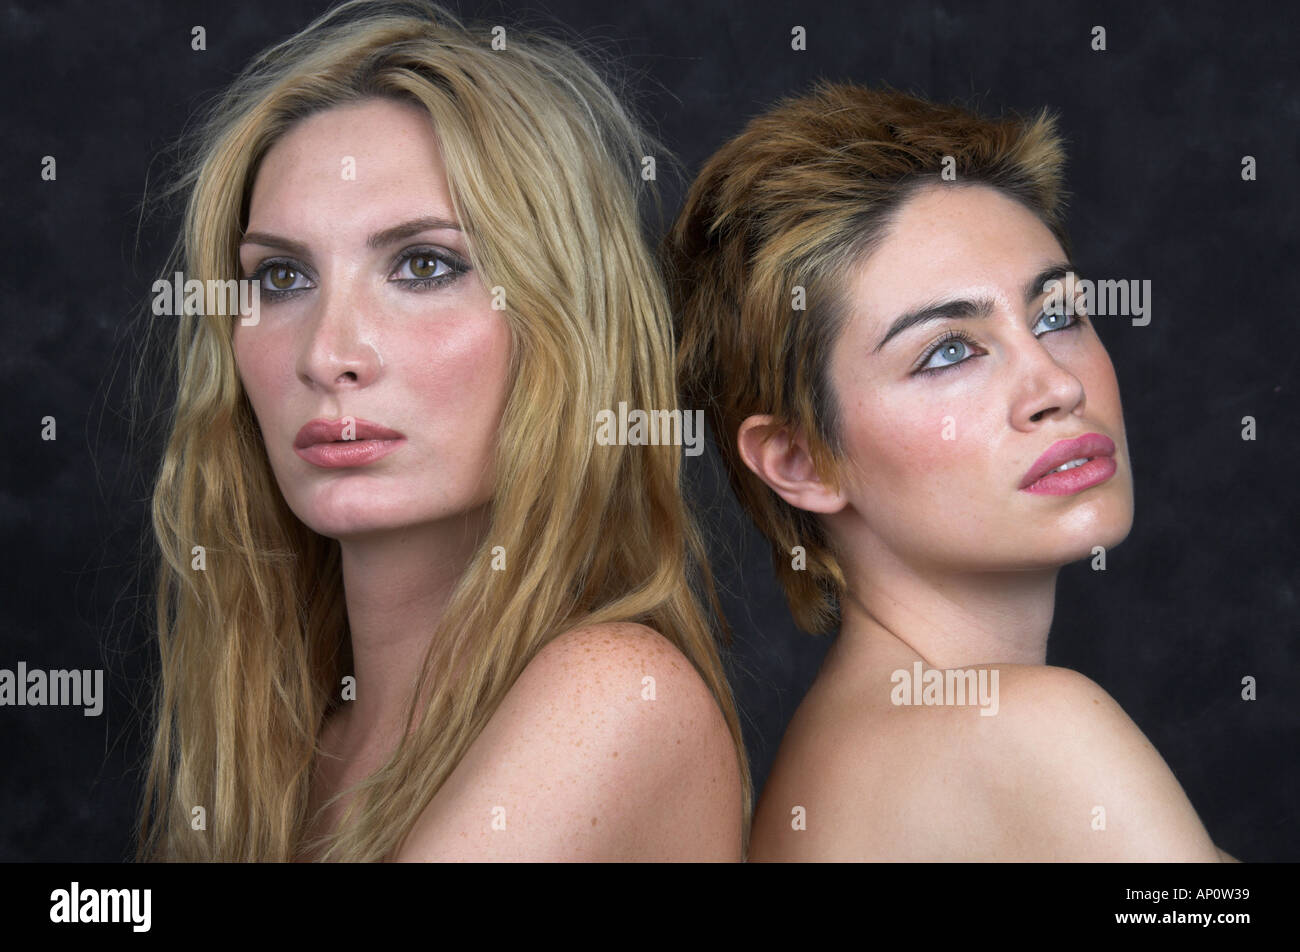 Portrait of Two Young Women Stock Photo